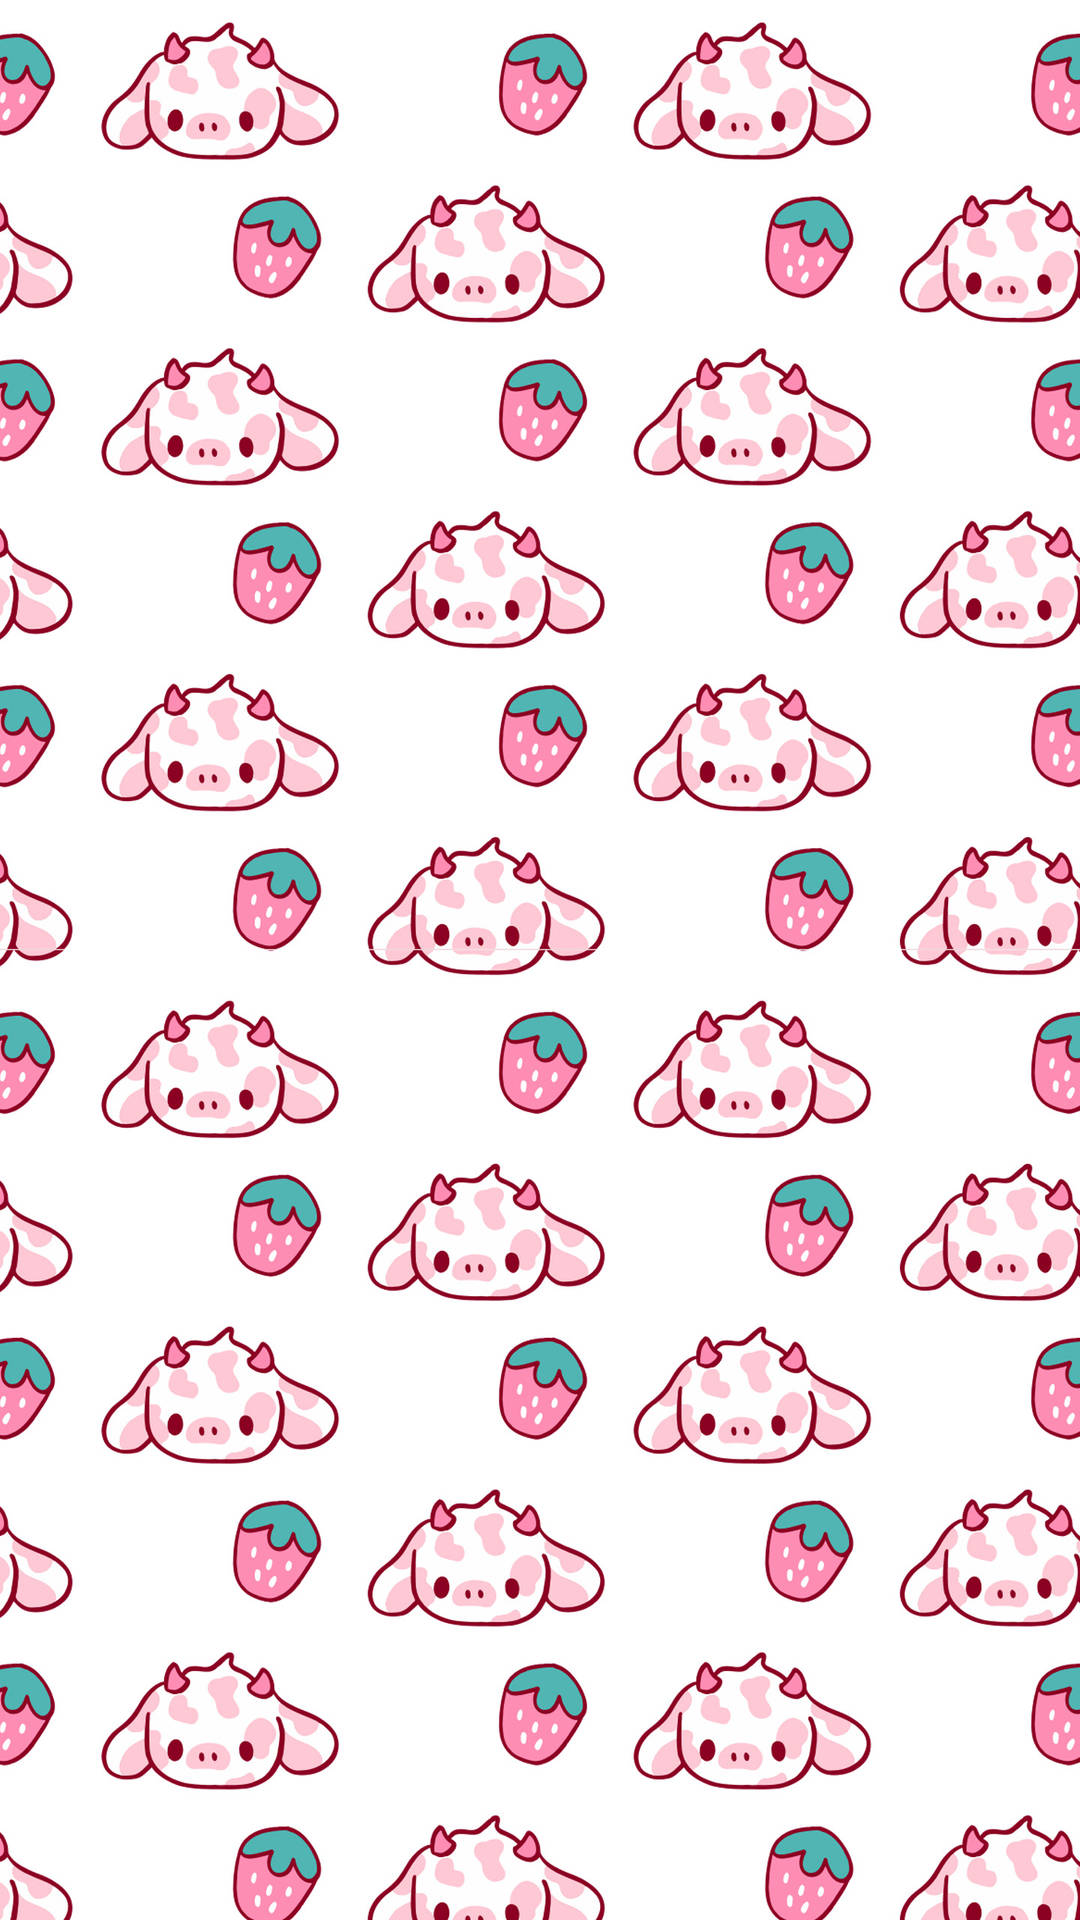 Strawberry cow  wallpaper  Cow wallpaper Cow drawing Strawberry  cow wallpaper iphone